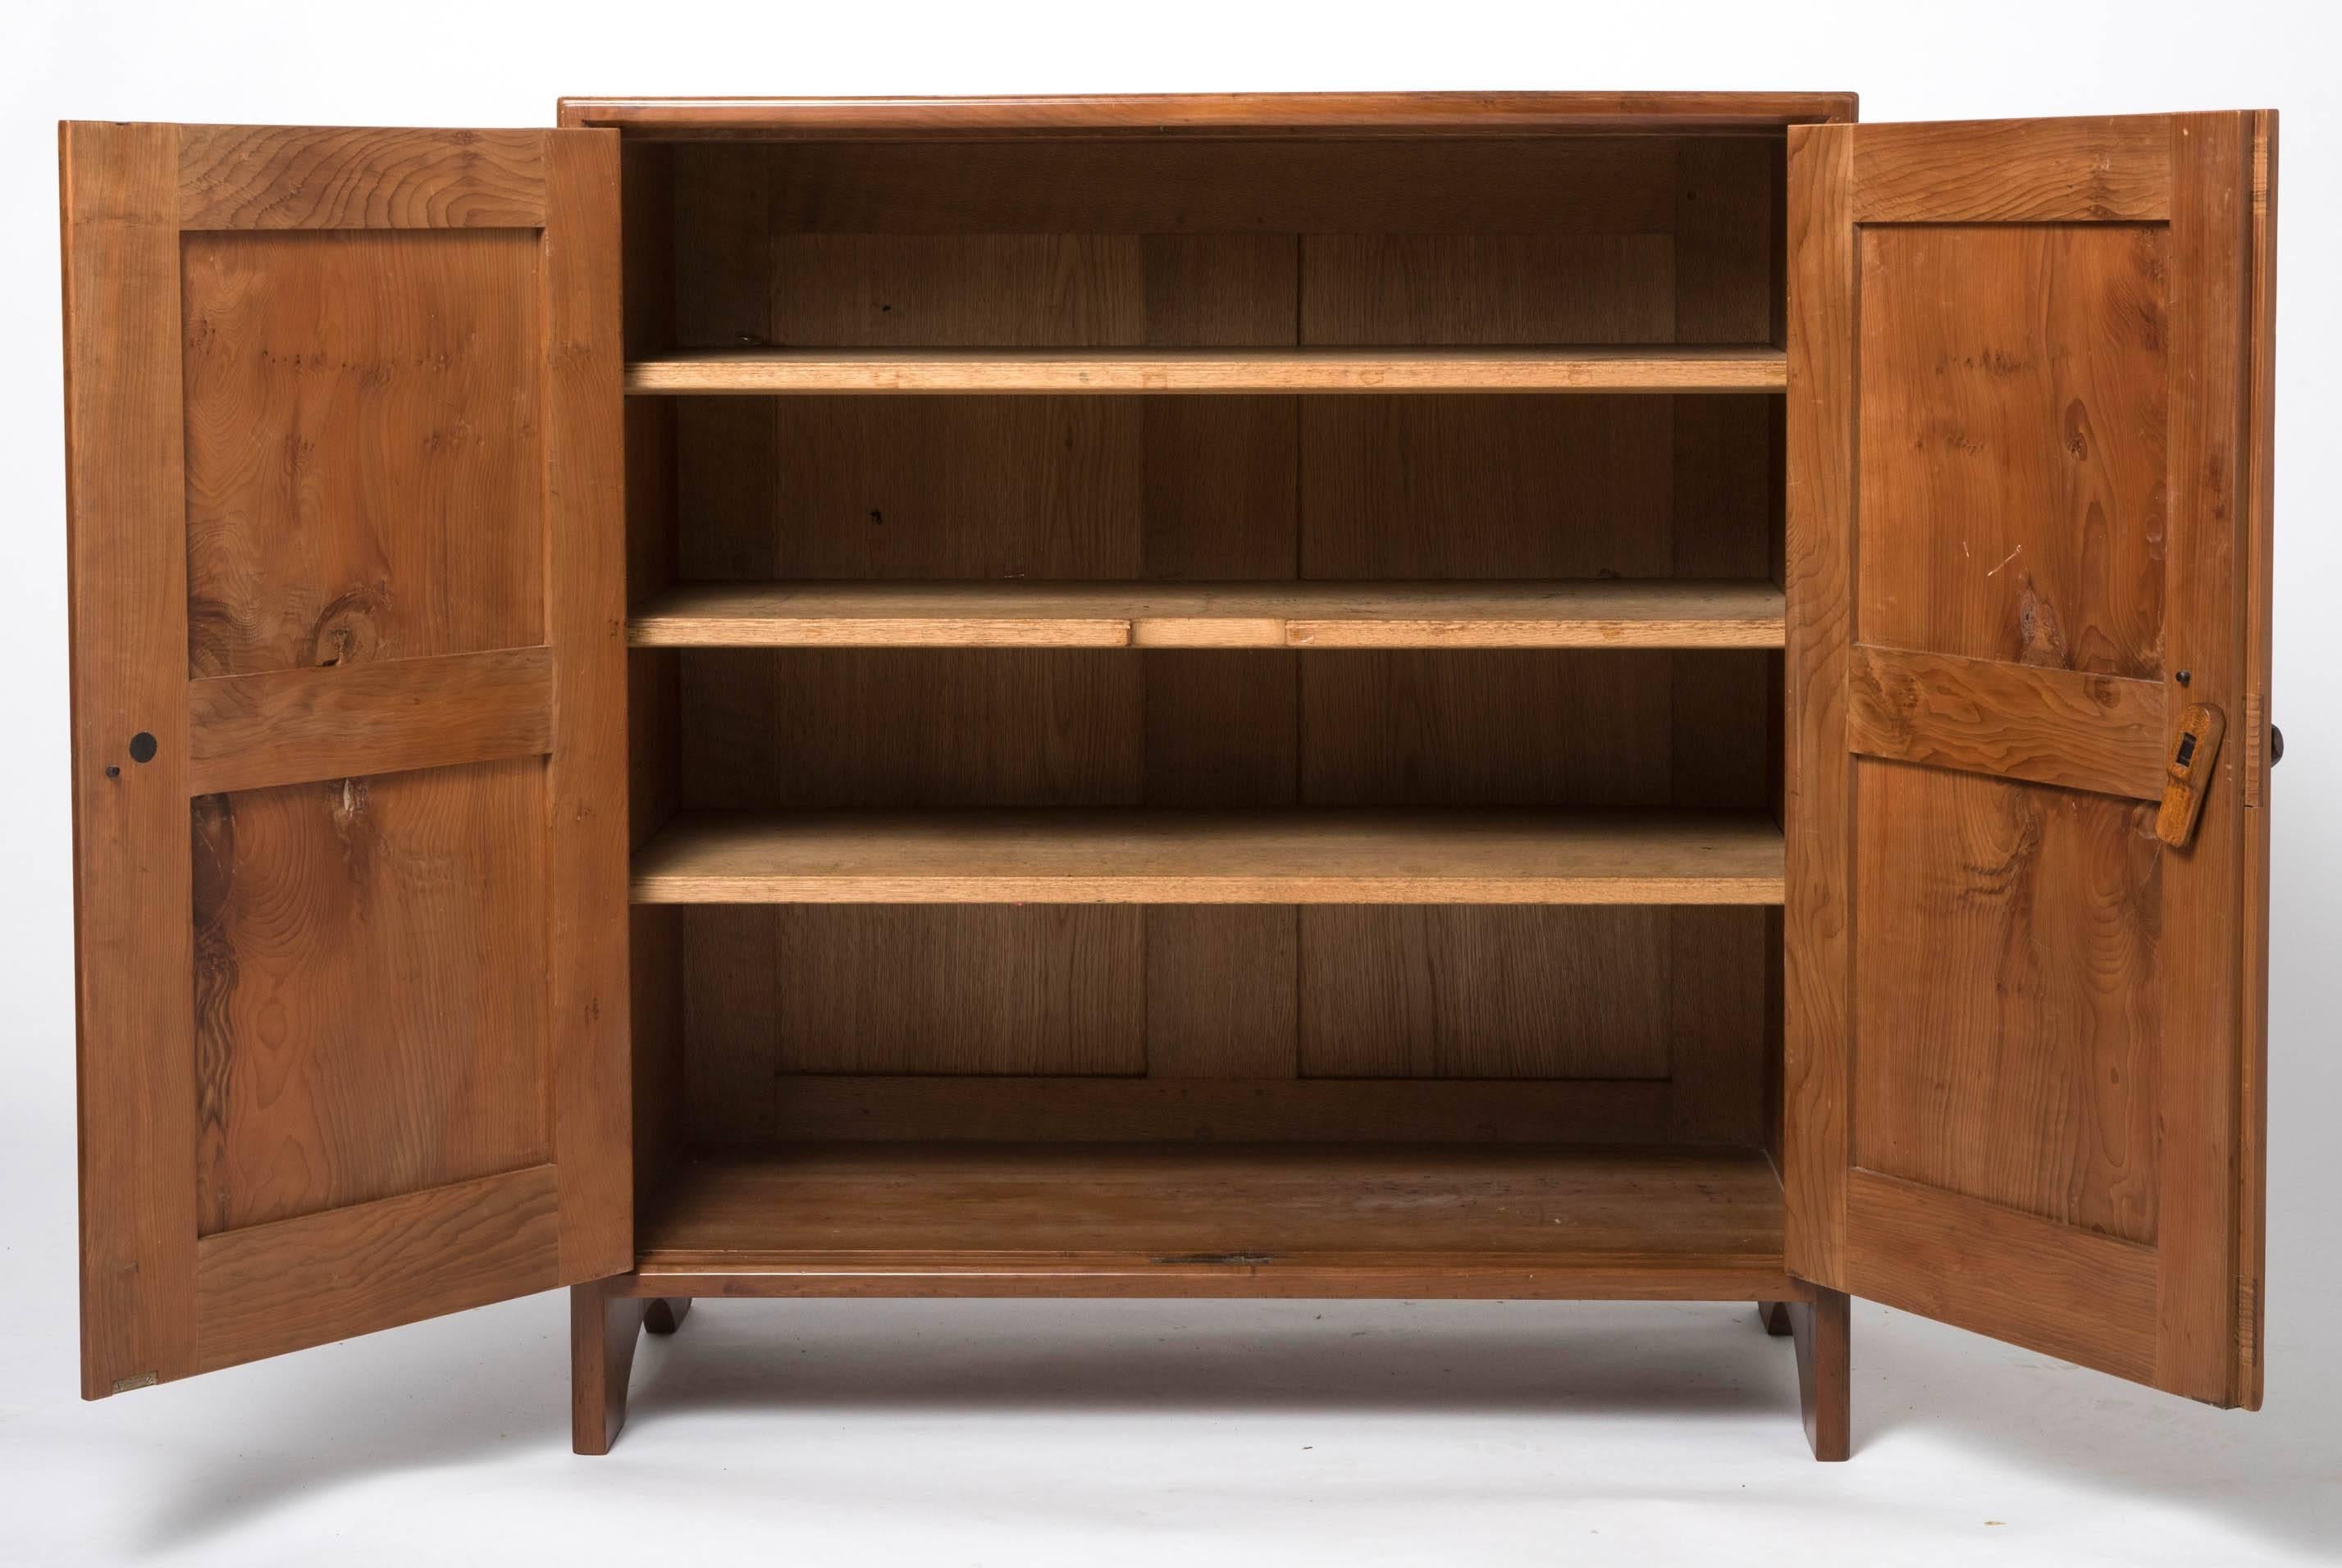 A rare yew cupboard by Edward Barnsley (1900-1987).
The top displaying open dovetails.
The twin hinged front doors with panelling. Carved handles.
Slightly tapering feet.
The interior with adjustable shelves,
England, circa 1930.
Measures: 83 cm